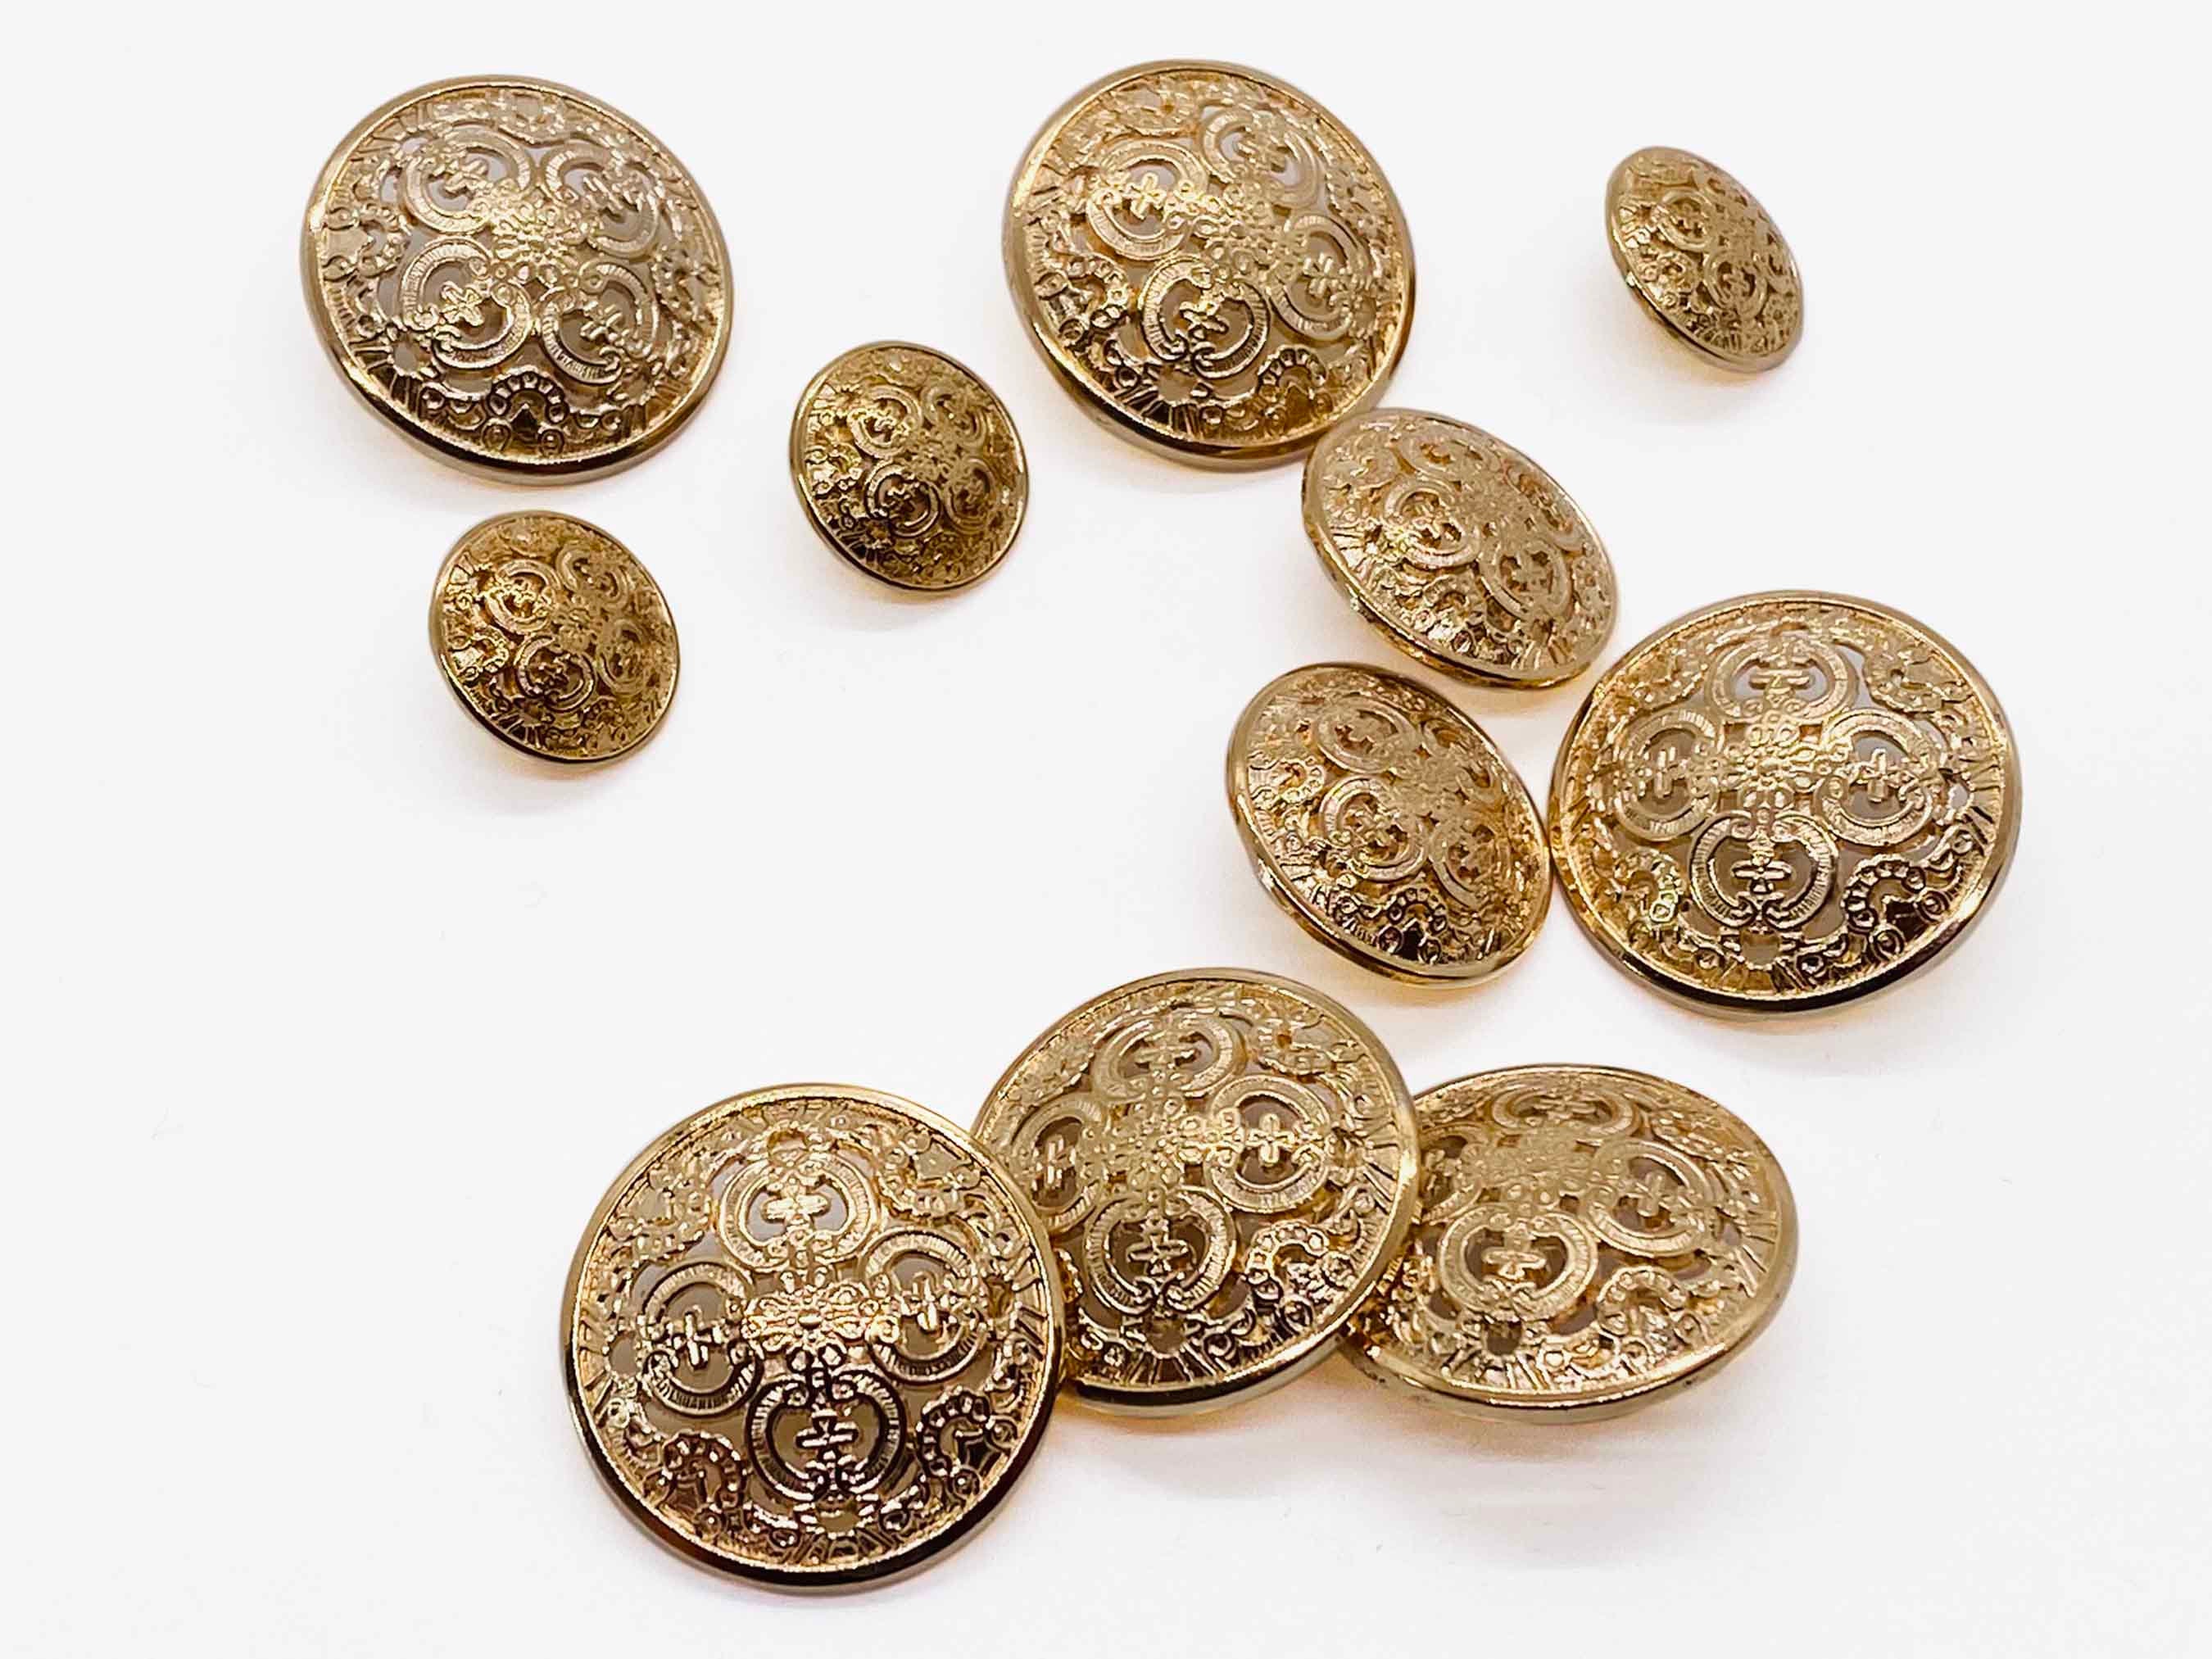 Gold Metal Shank Buttons, Golden Color, Vintage Retro Style, Raised Top,  for Sewing Cardigan Jacket Coat Suit Blazer, 12.5mm, Half Inch -  Canada